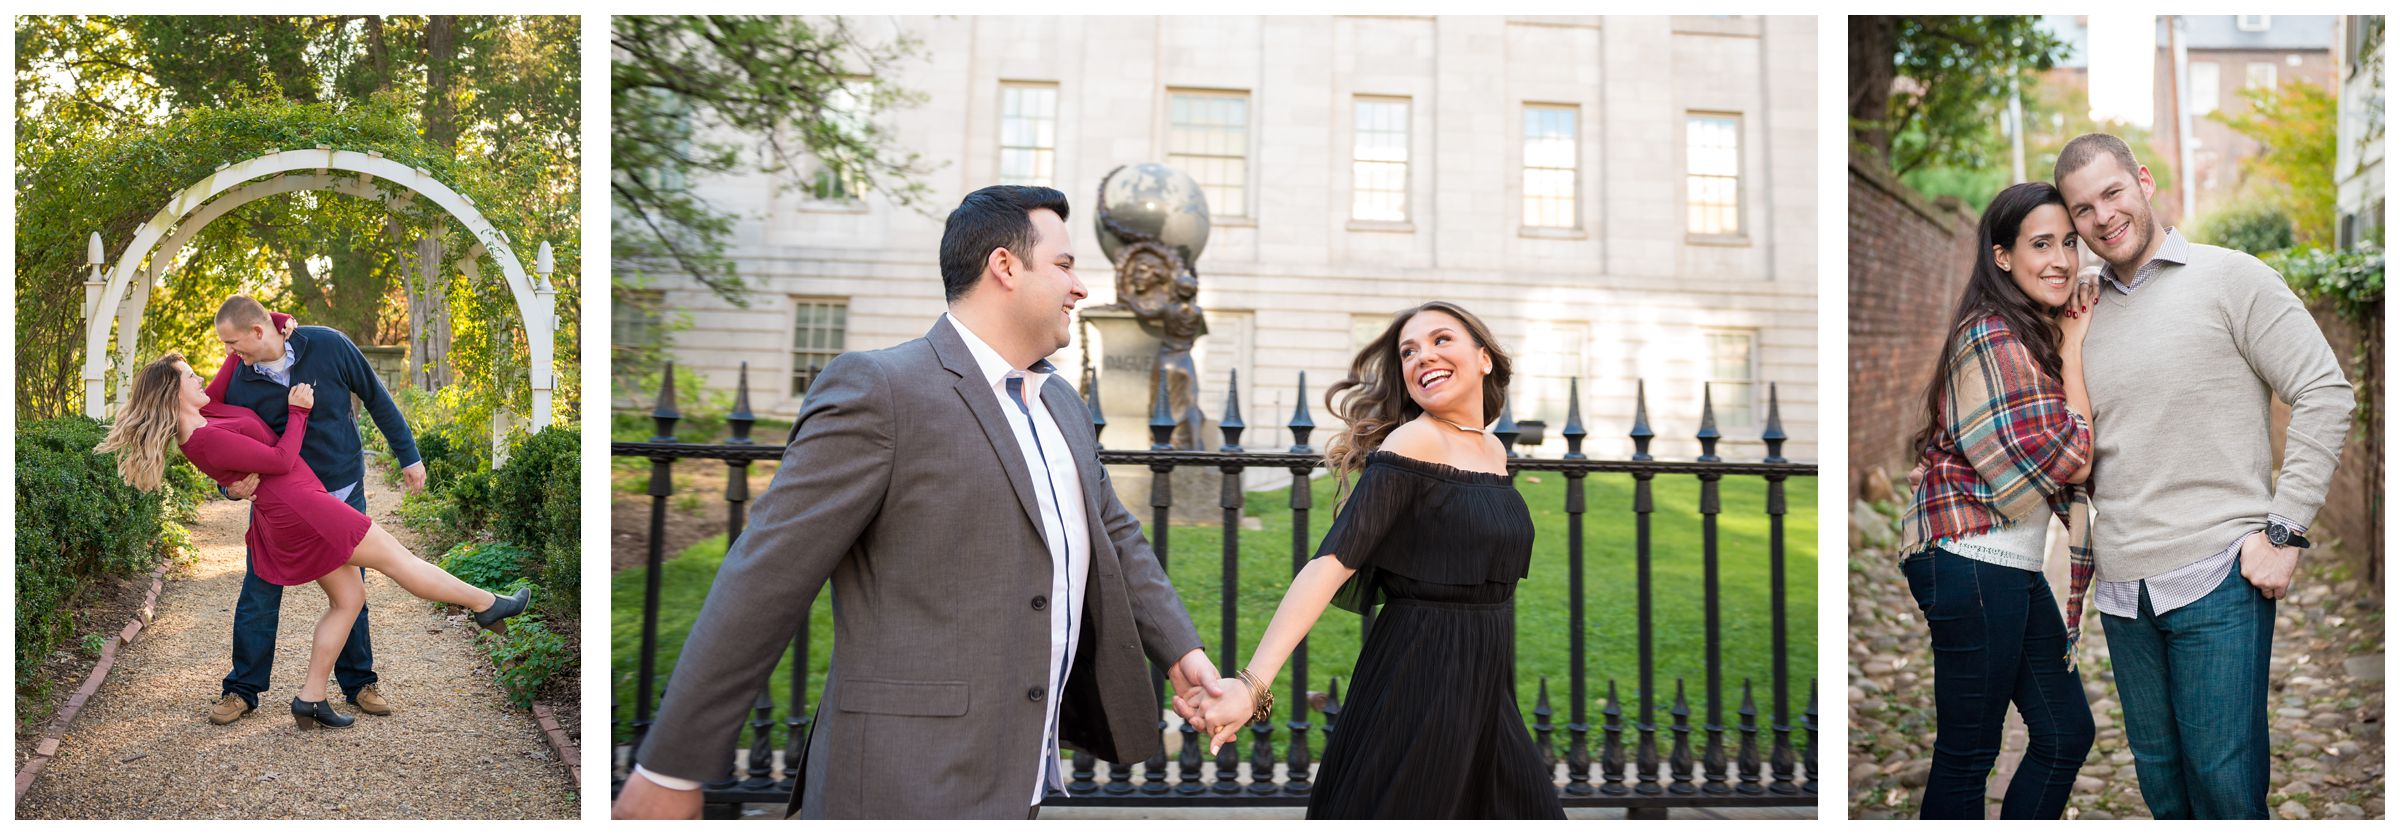 5 tips for a great engagement session